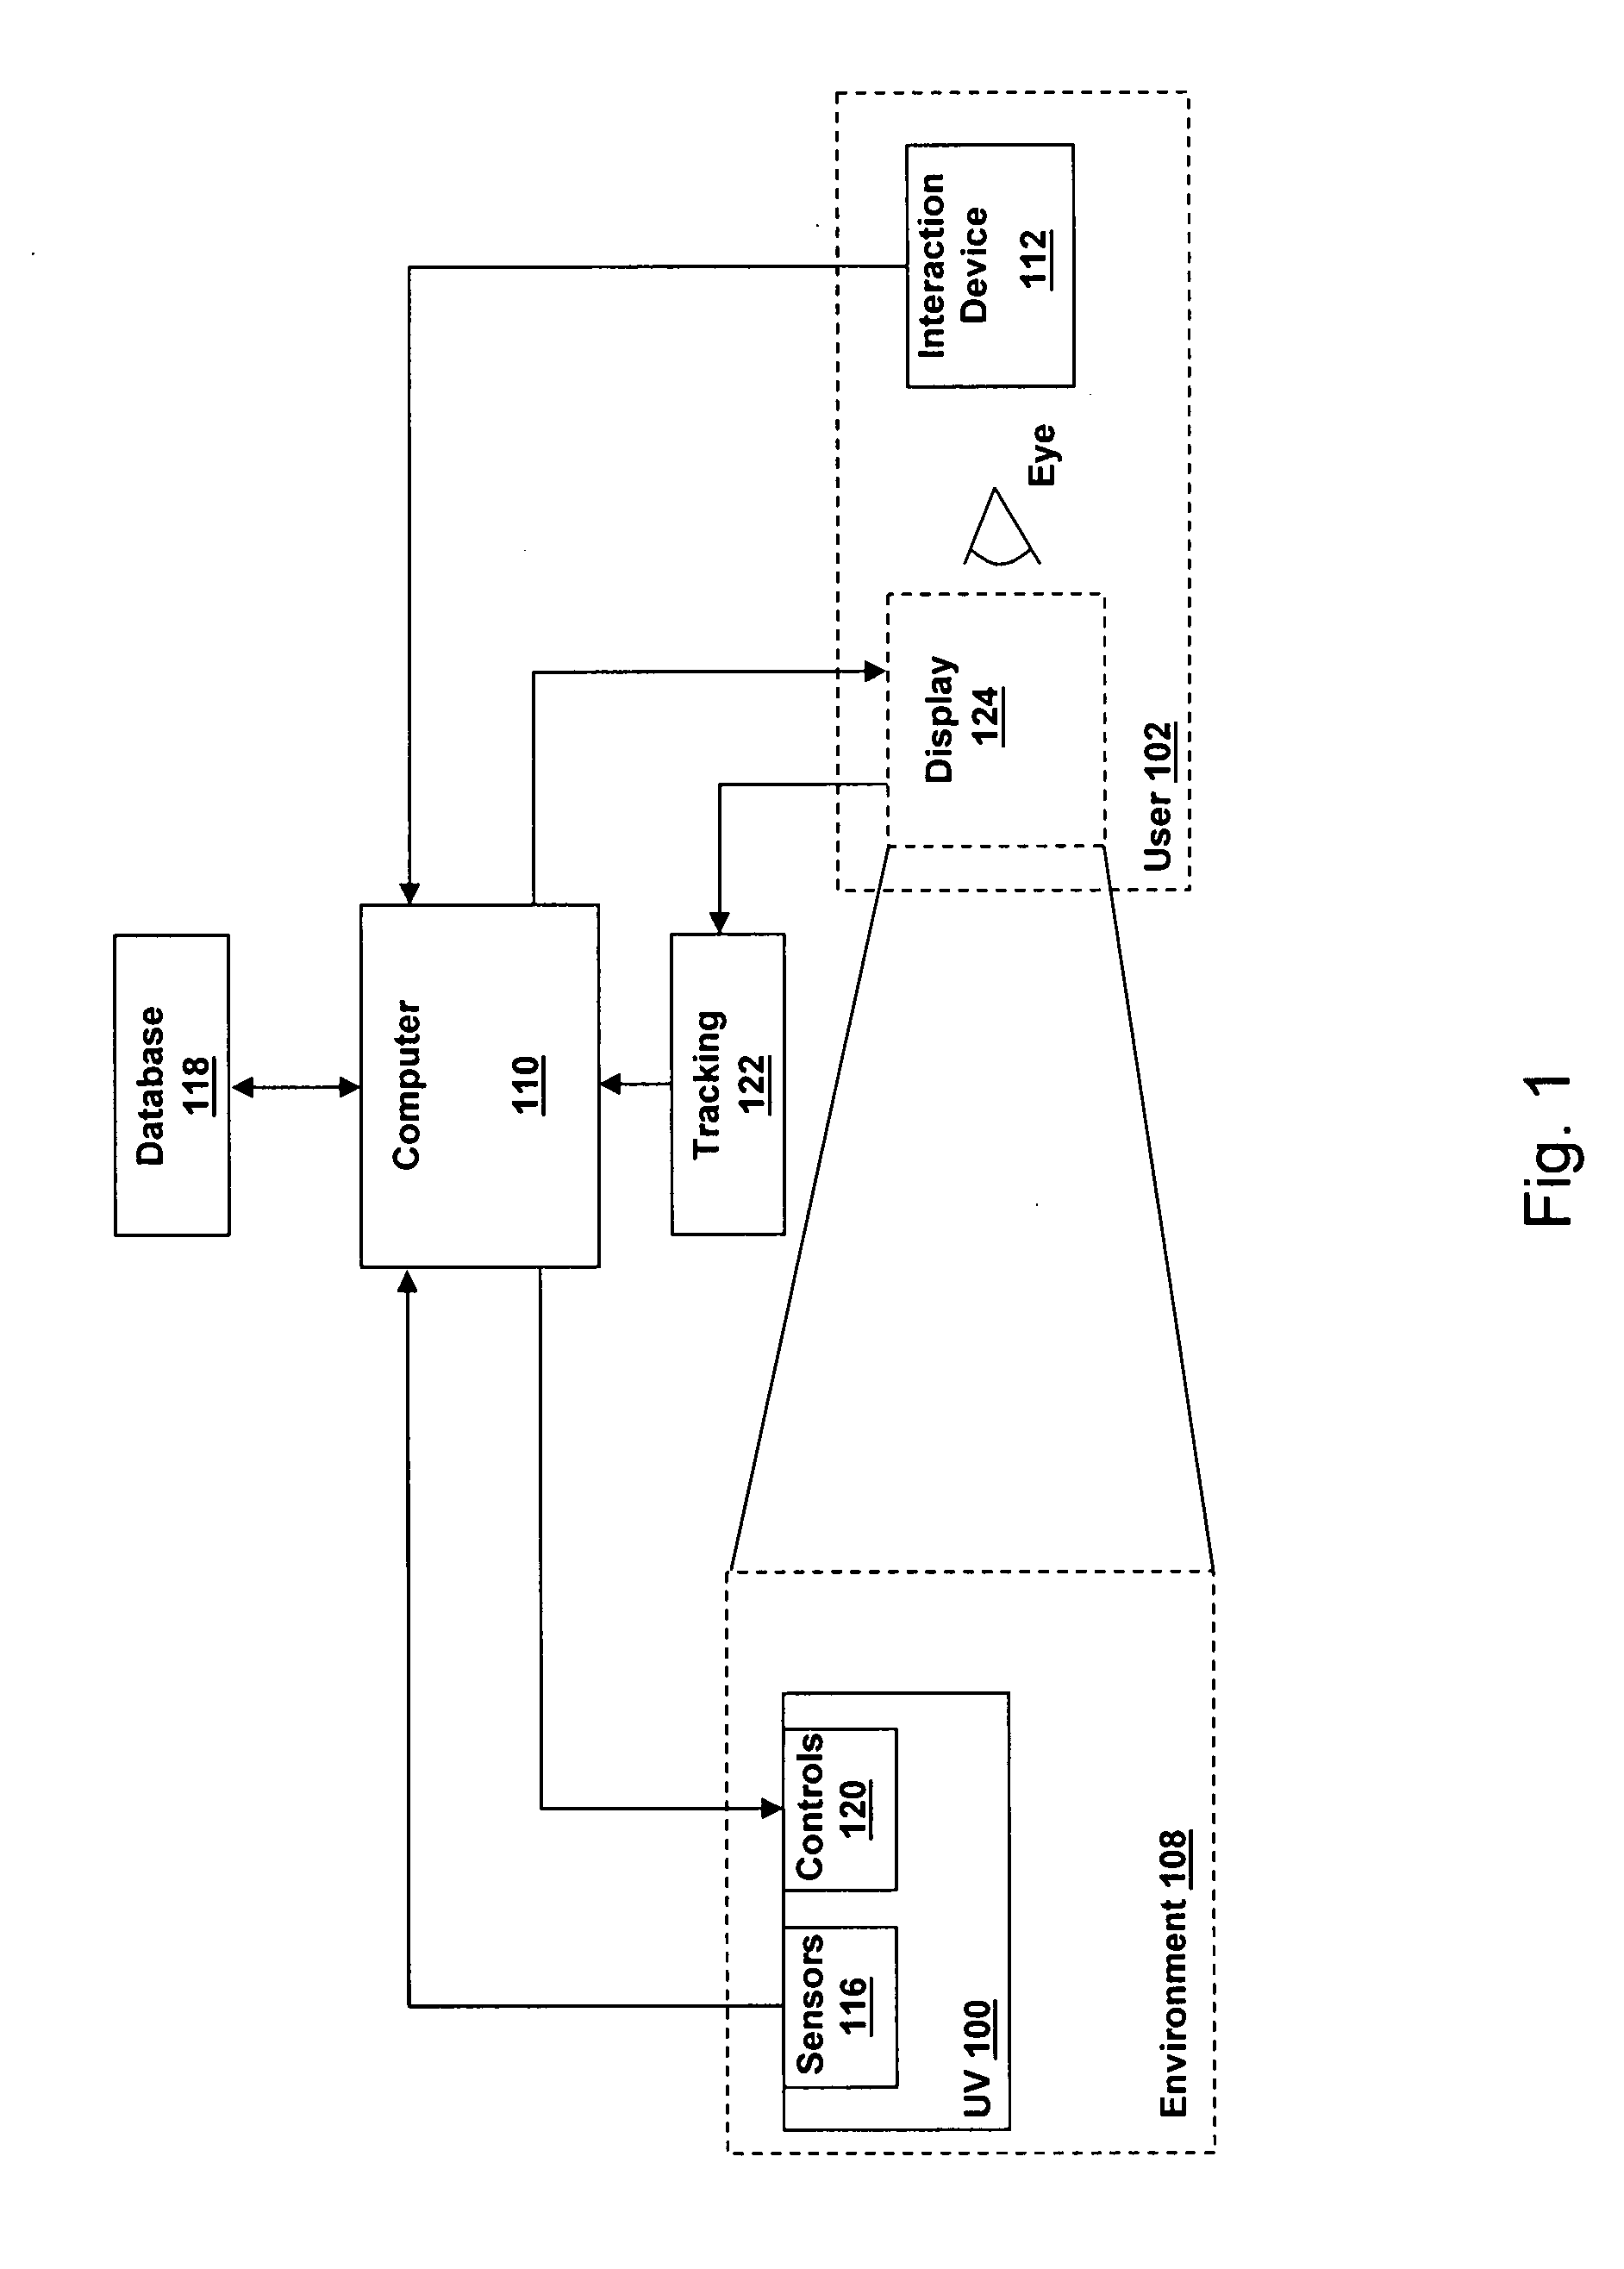 Augmented reality-based system and method providing status and control of unmanned vehicles